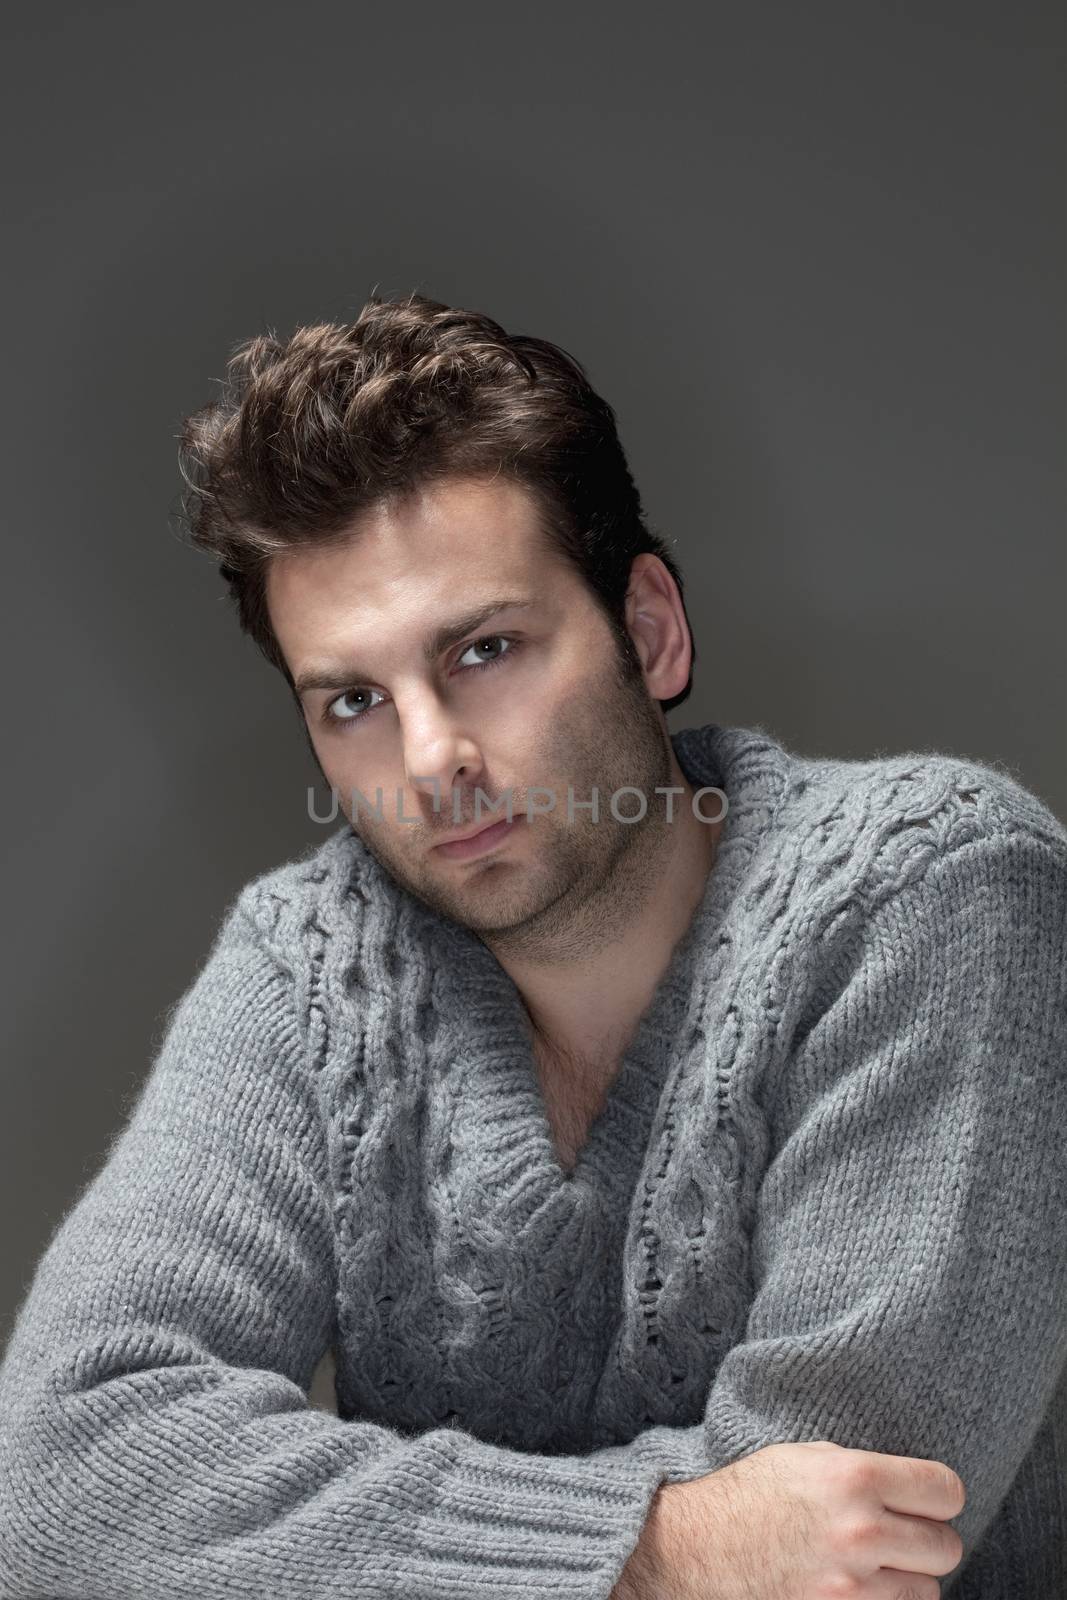 portrait of a man in a sweater looking at camera - isolated on gray